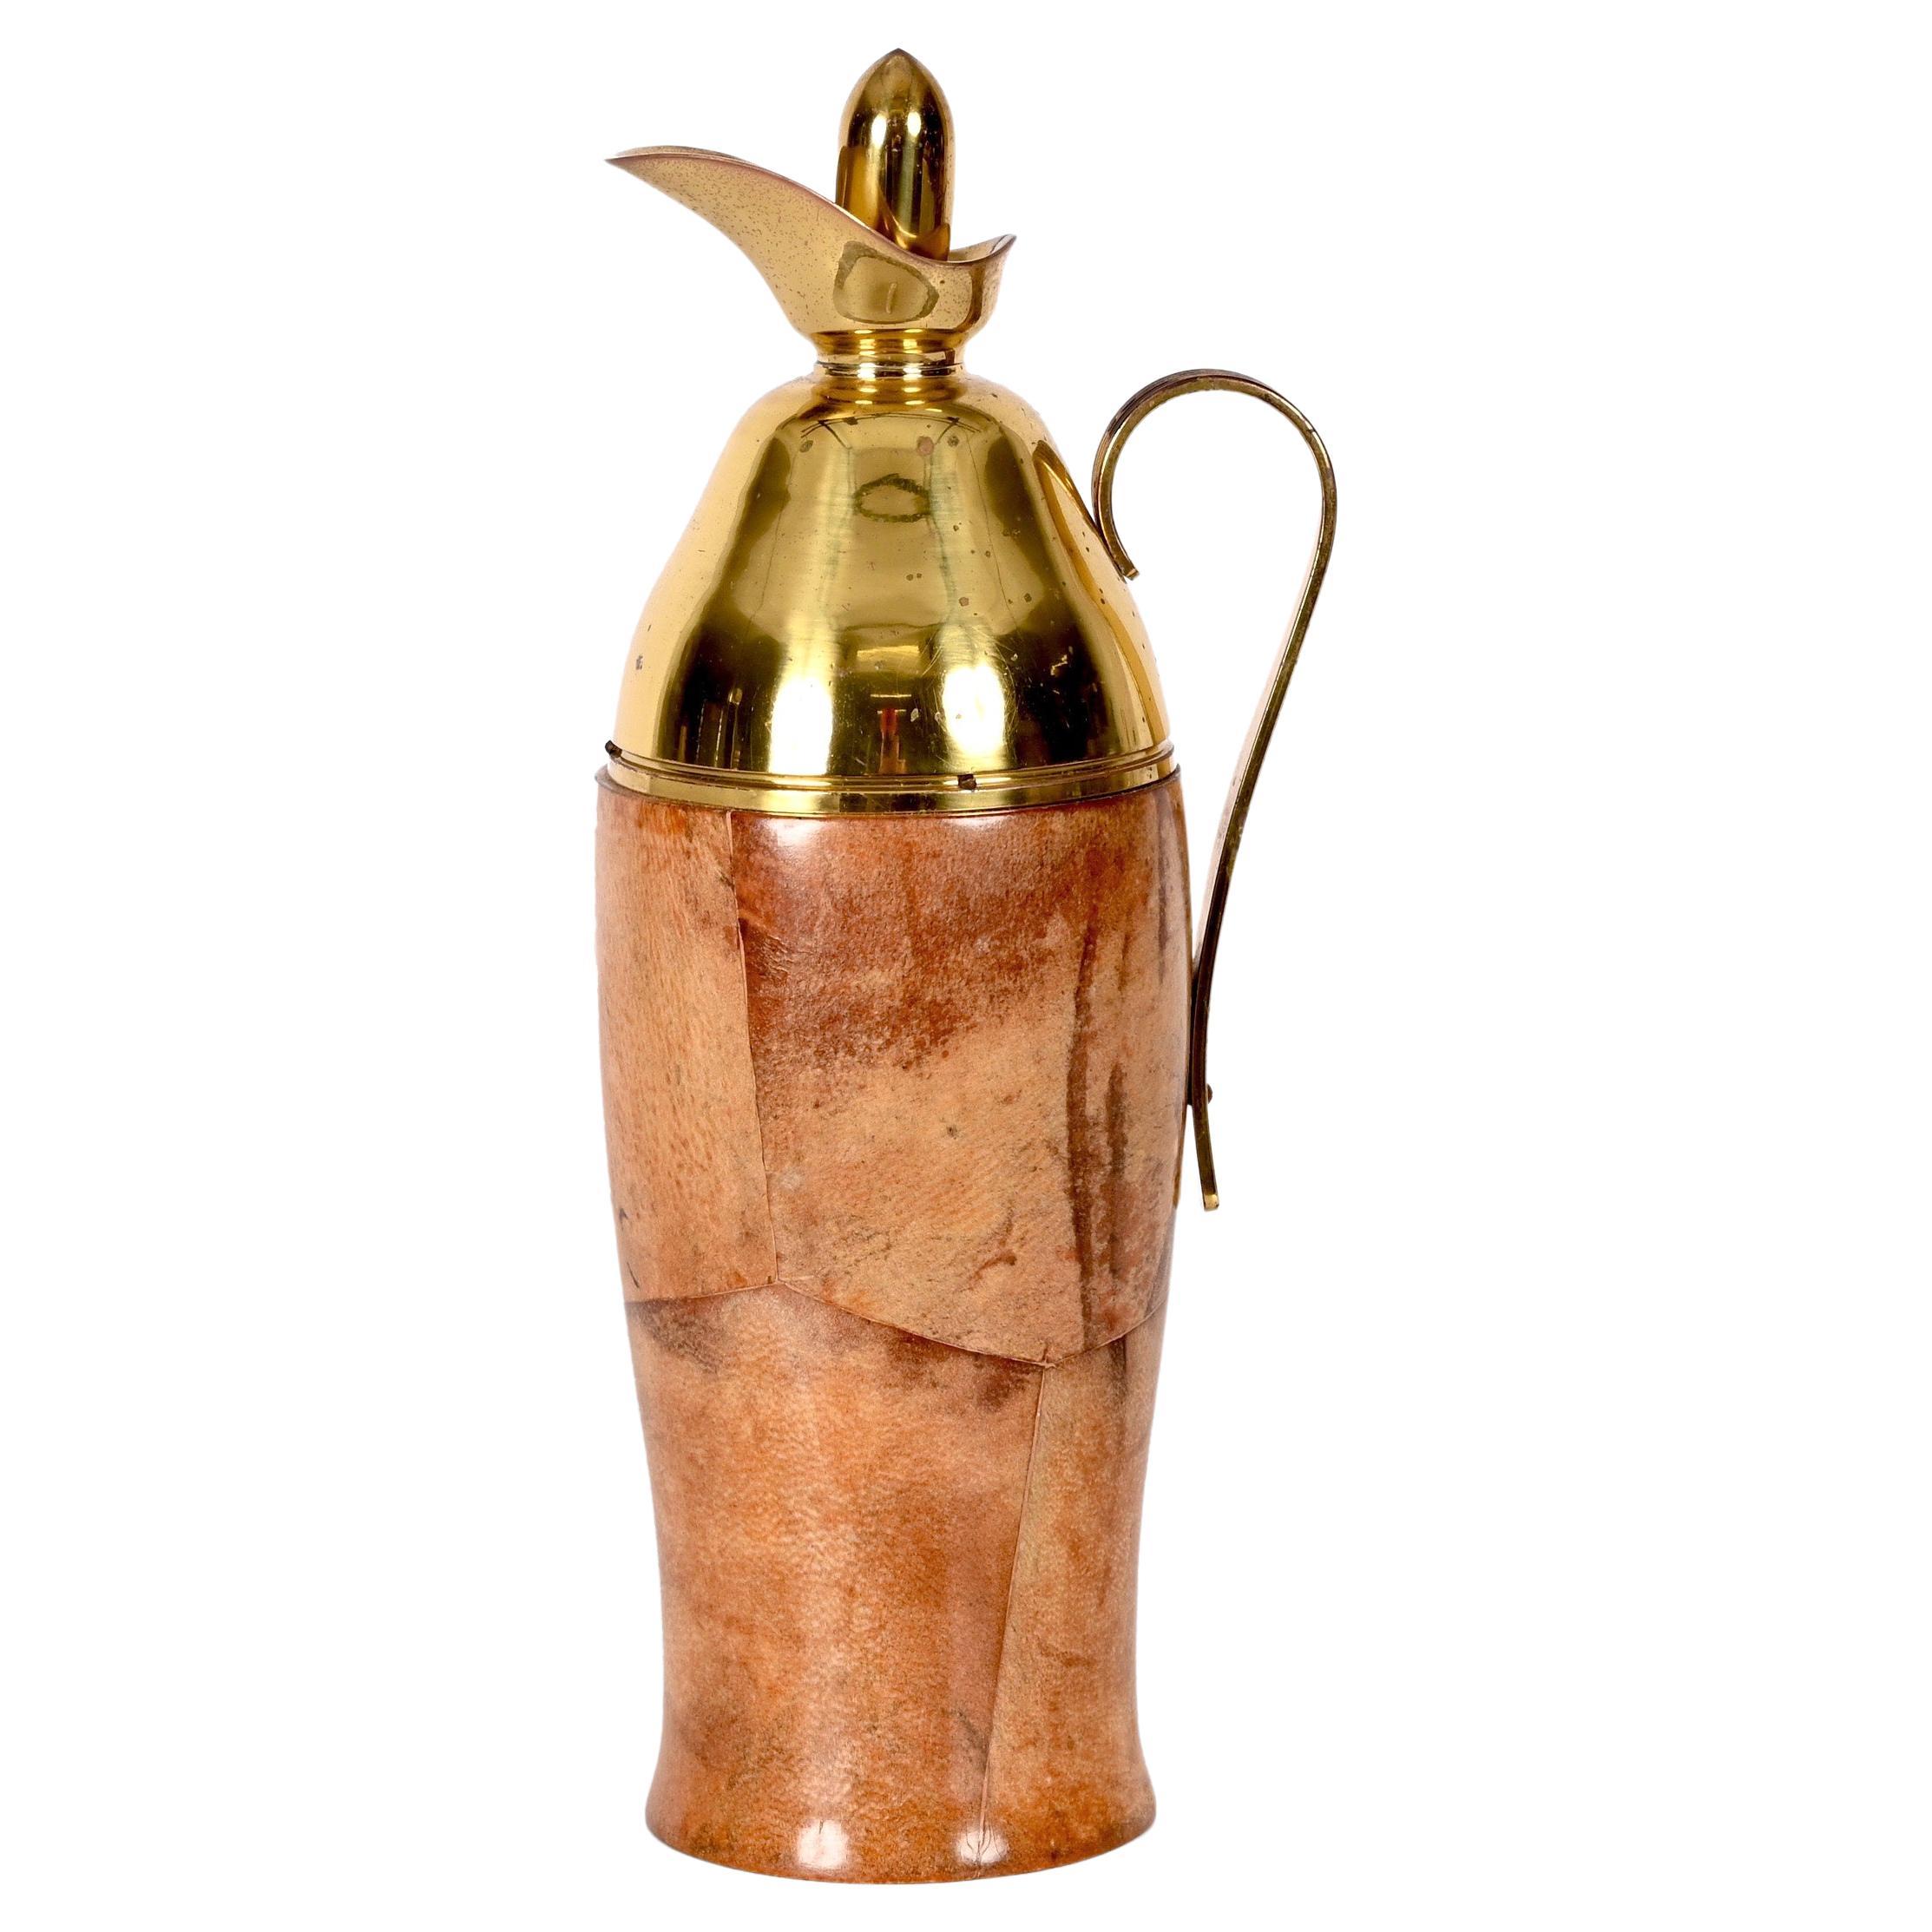 Aldo Tura Midcentury Goatskin and Brass Thermos Decanter for Macabo, Italy 1950s